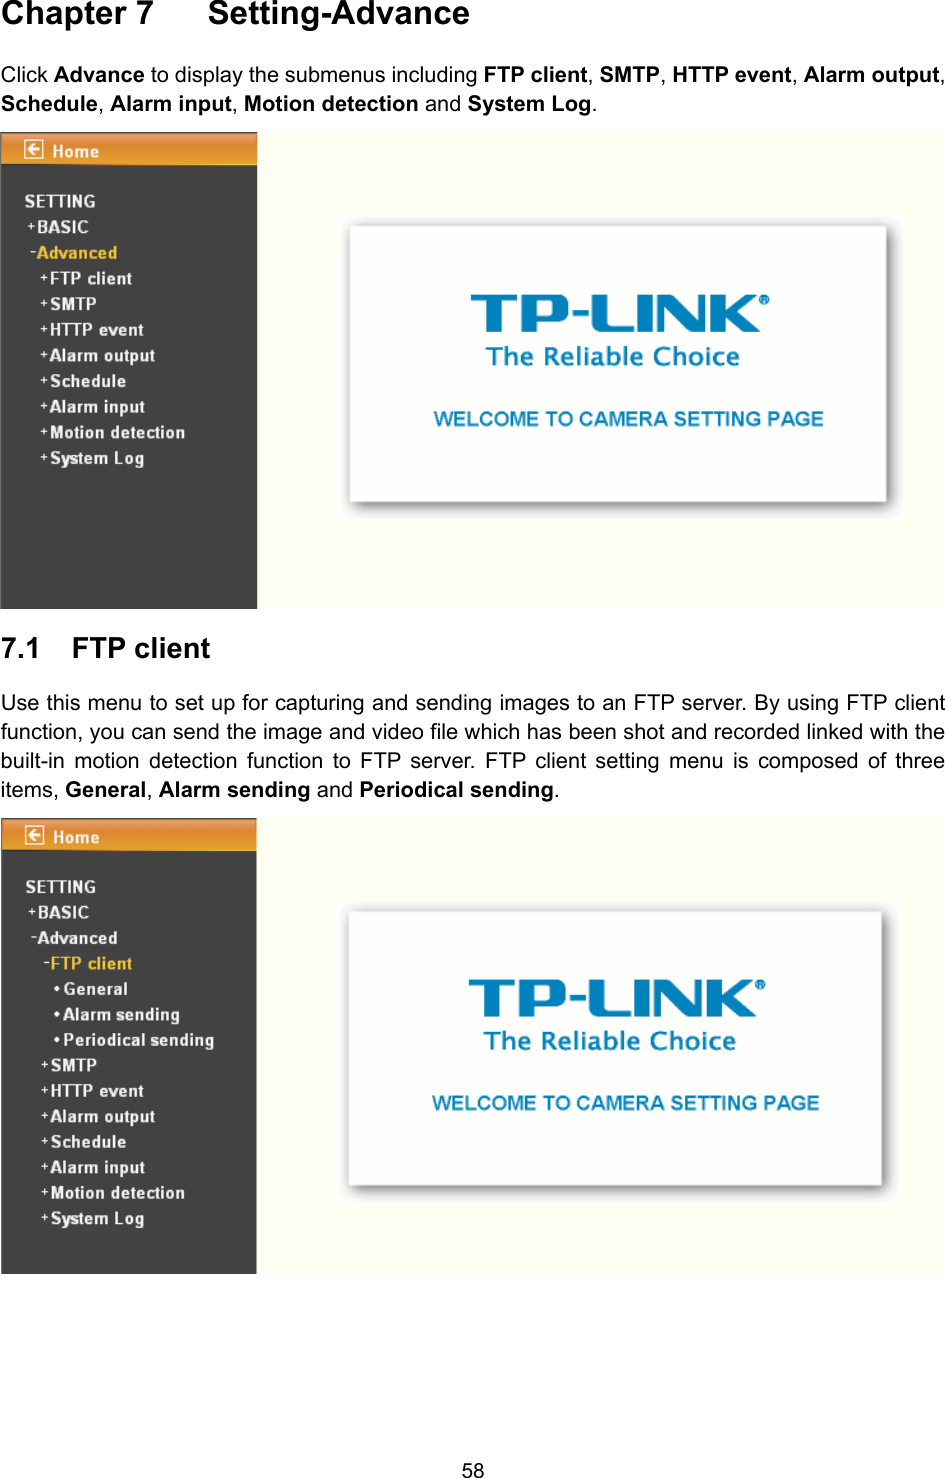 58 Chapter 7  Setting-Advance Click Advance to display the submenus including FTP client, SMTP, HTTP event, Alarm output, Schedule, Alarm input, Motion detection and System Log.  7.1  FTP client Use this menu to set up for capturing and sending images to an FTP server. By using FTP client function, you can send the image and video file which has been shot and recorded linked with the built-in motion detection function to FTP server. FTP client setting menu is composed of three items, General, Alarm sending and Periodical sending.  